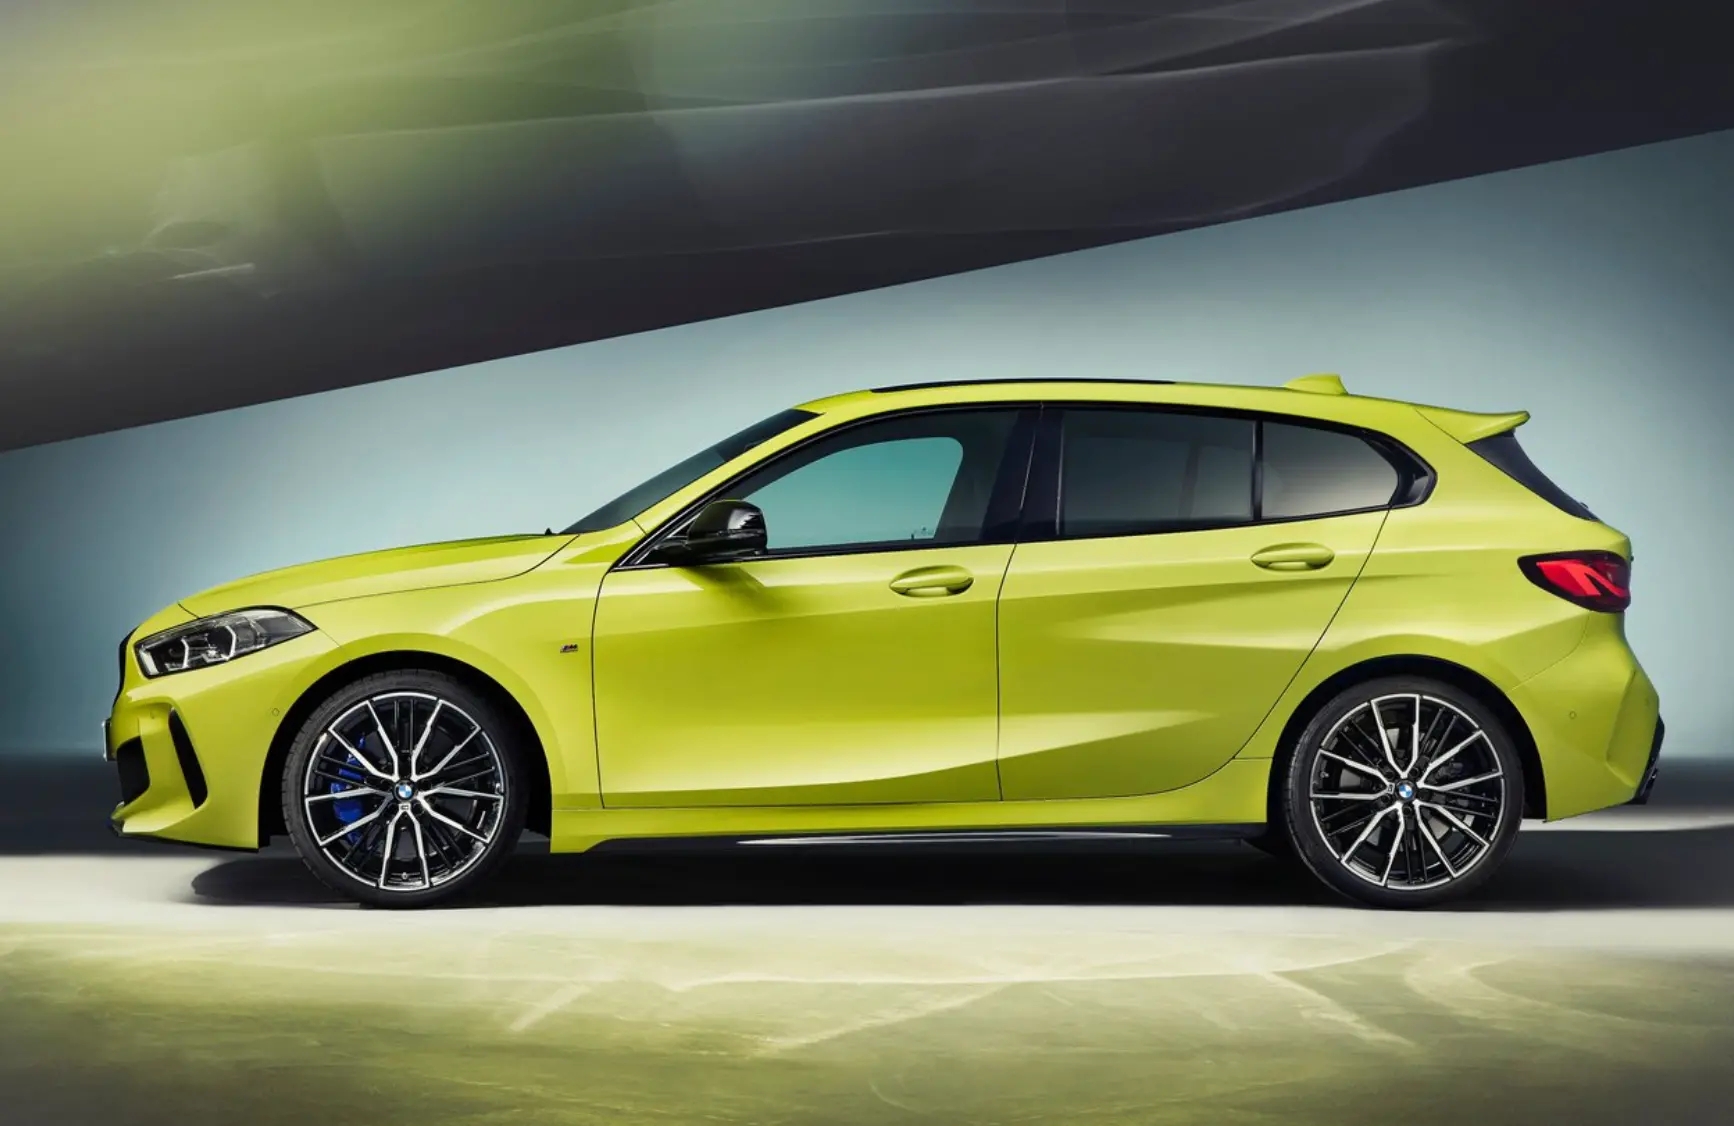 Official Image Of 2022 Bmw M135i Xdrive Released Built On Horizontal Front Wheel Drive Platform